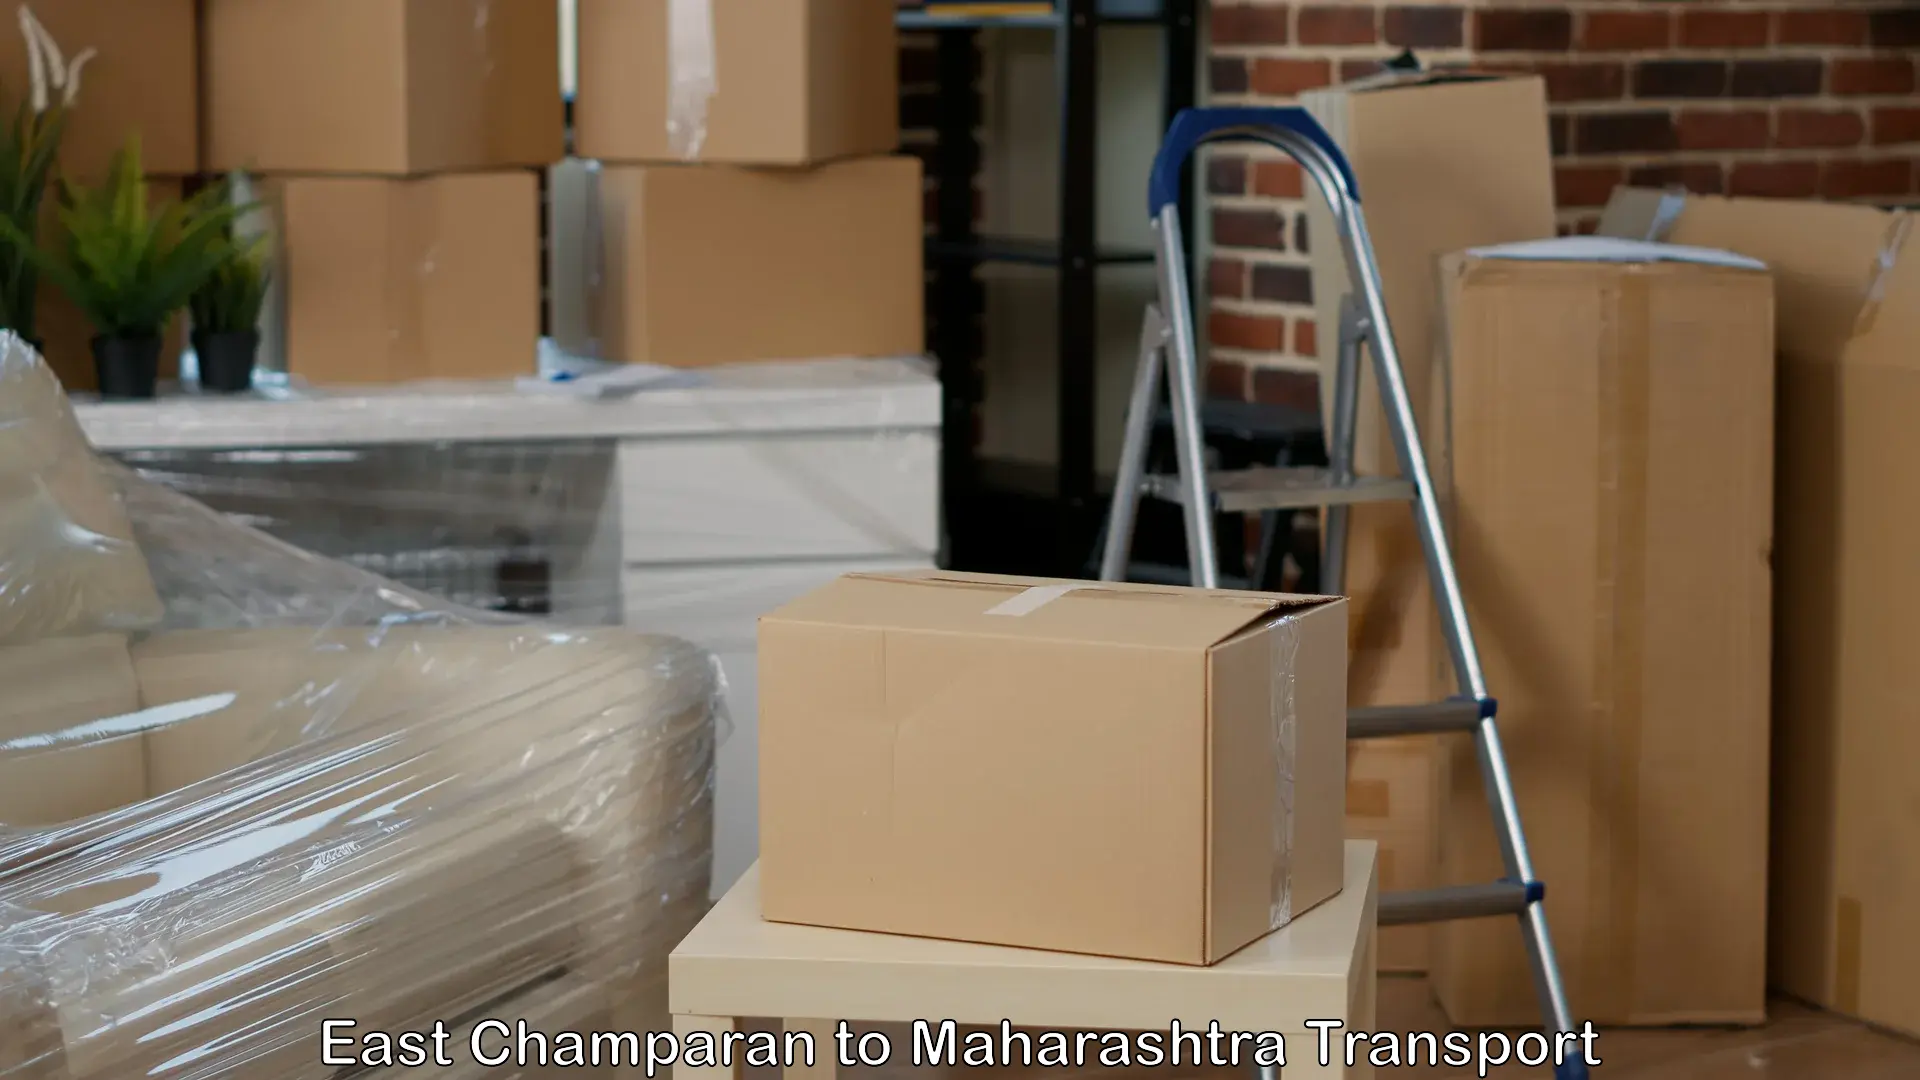 Domestic goods transportation services East Champaran to Dusarbid